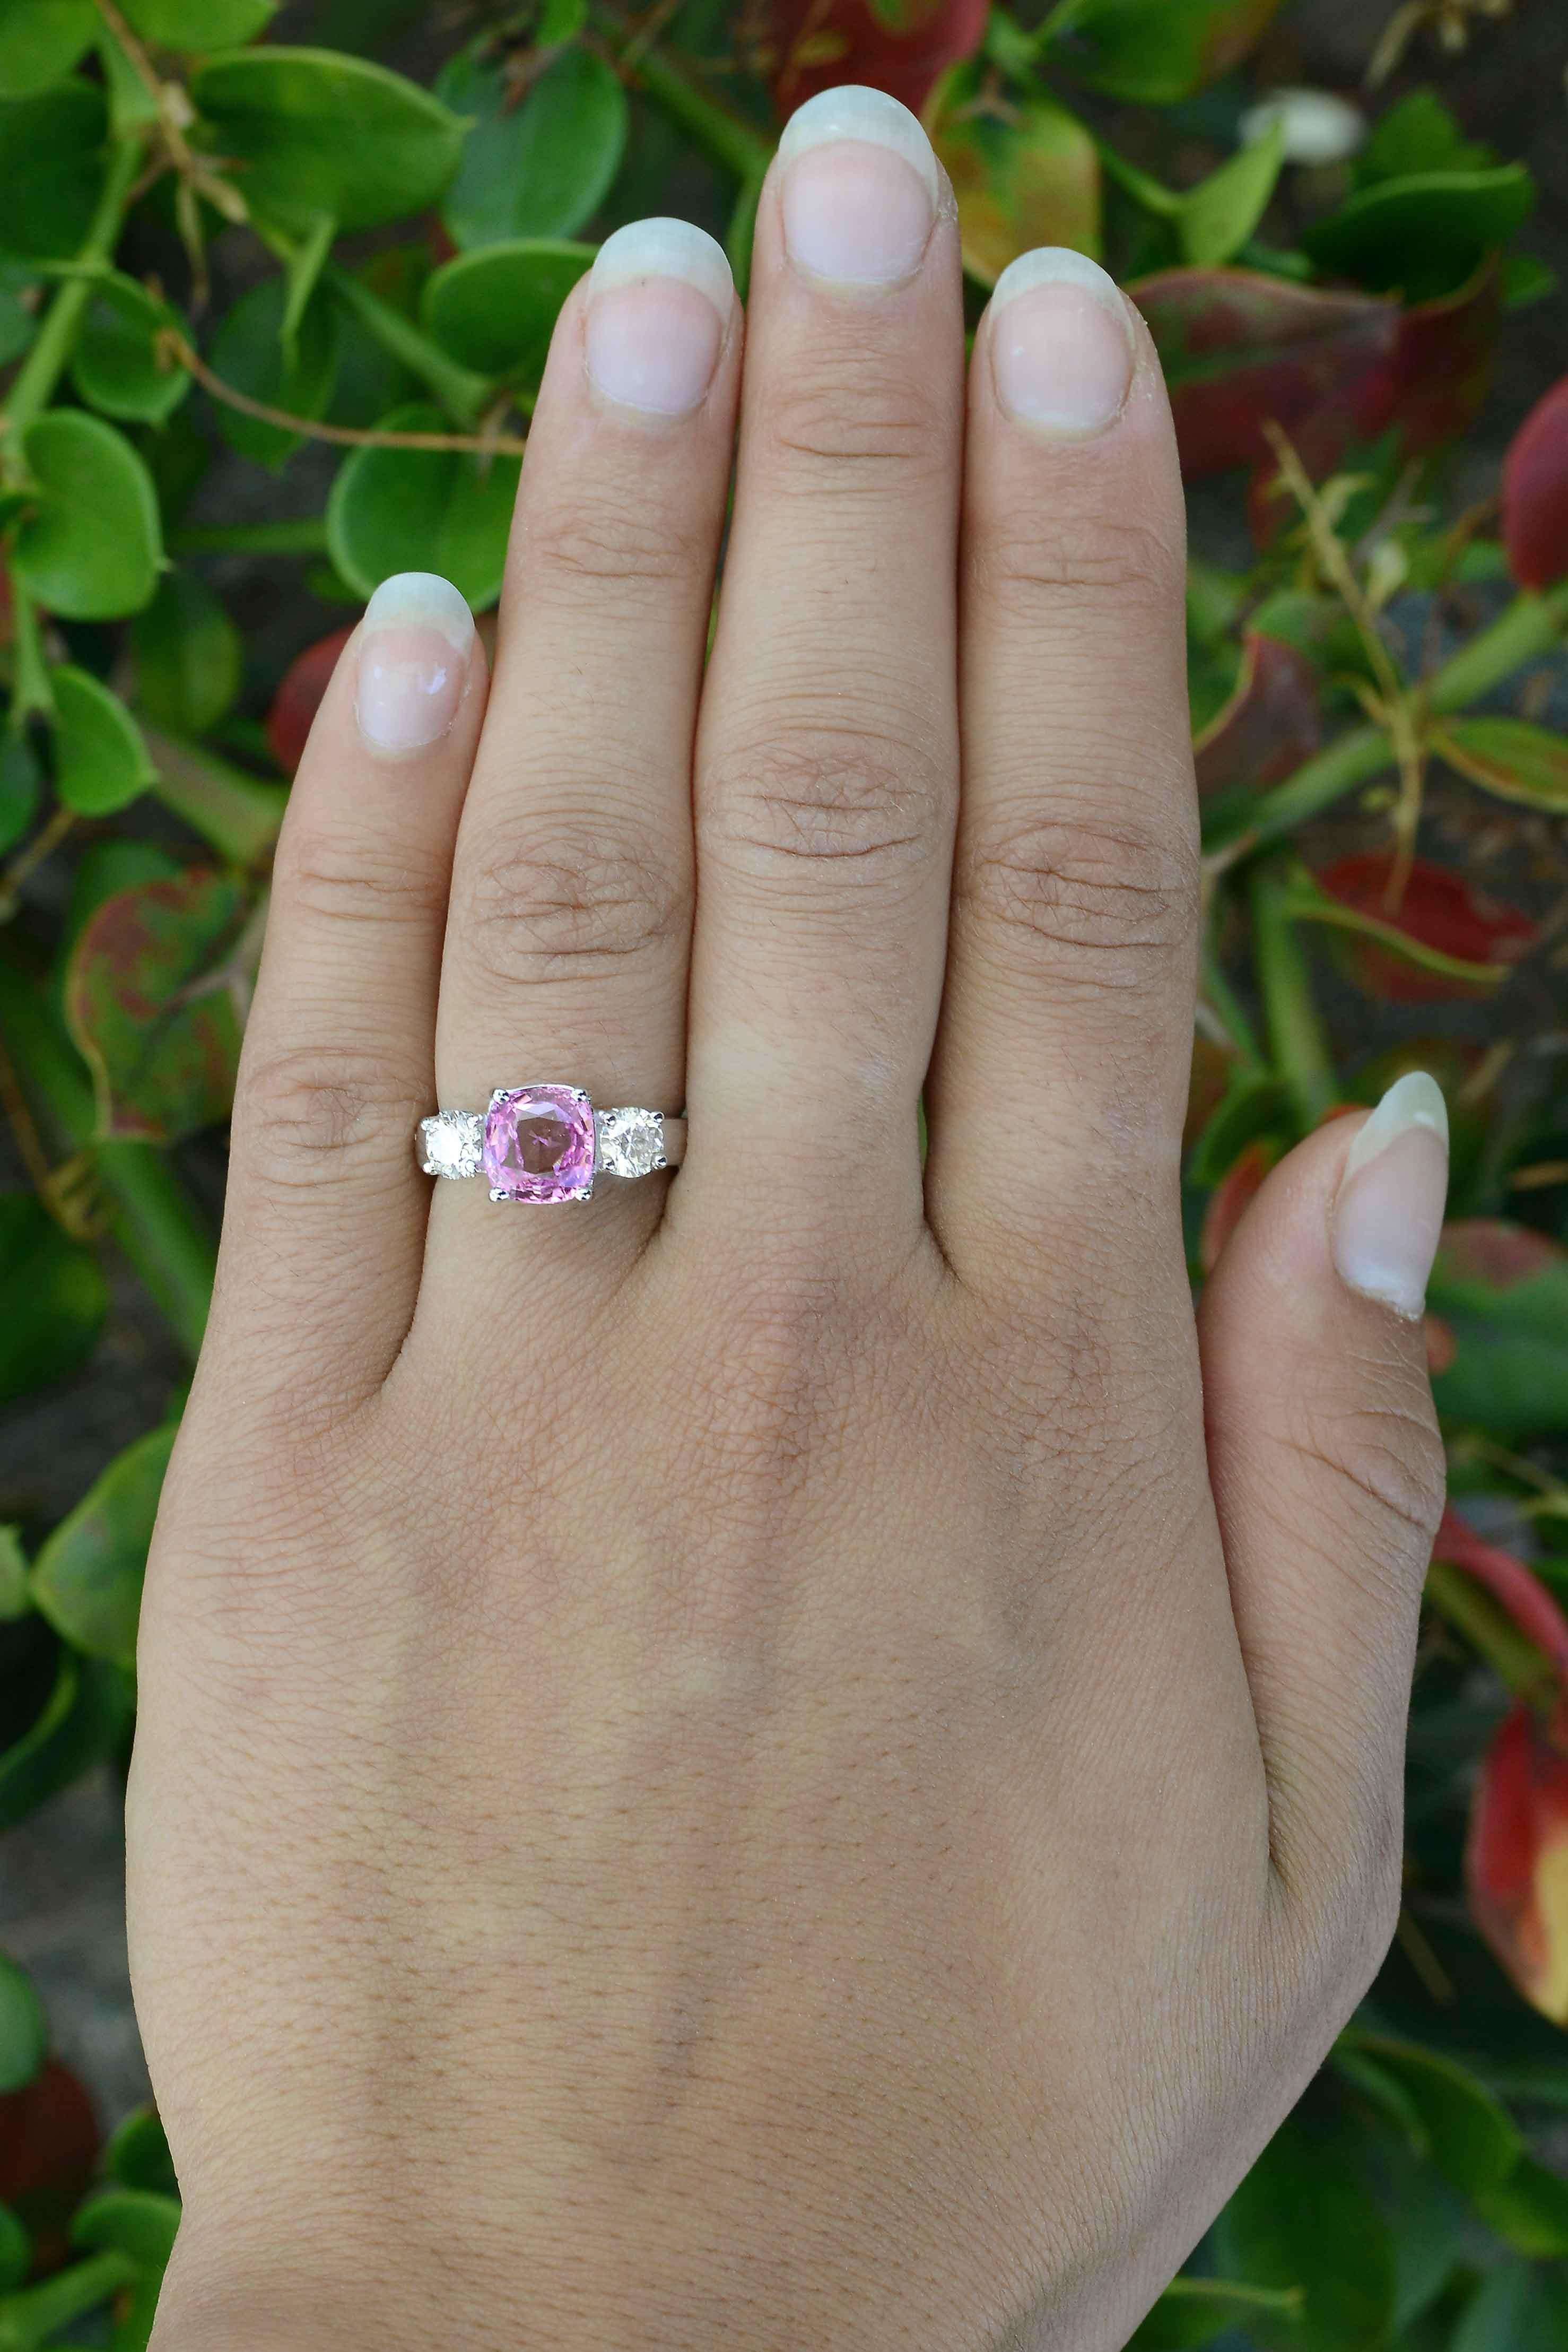 Taking center stage of this pink sapphire engagement ring is a 2.72 carat antique chunk of a tantalizing purplish pink color. GIA certified as natural, set in a trinity design, a timeless classic made with a reclaimed vintage gemstone and flanked by